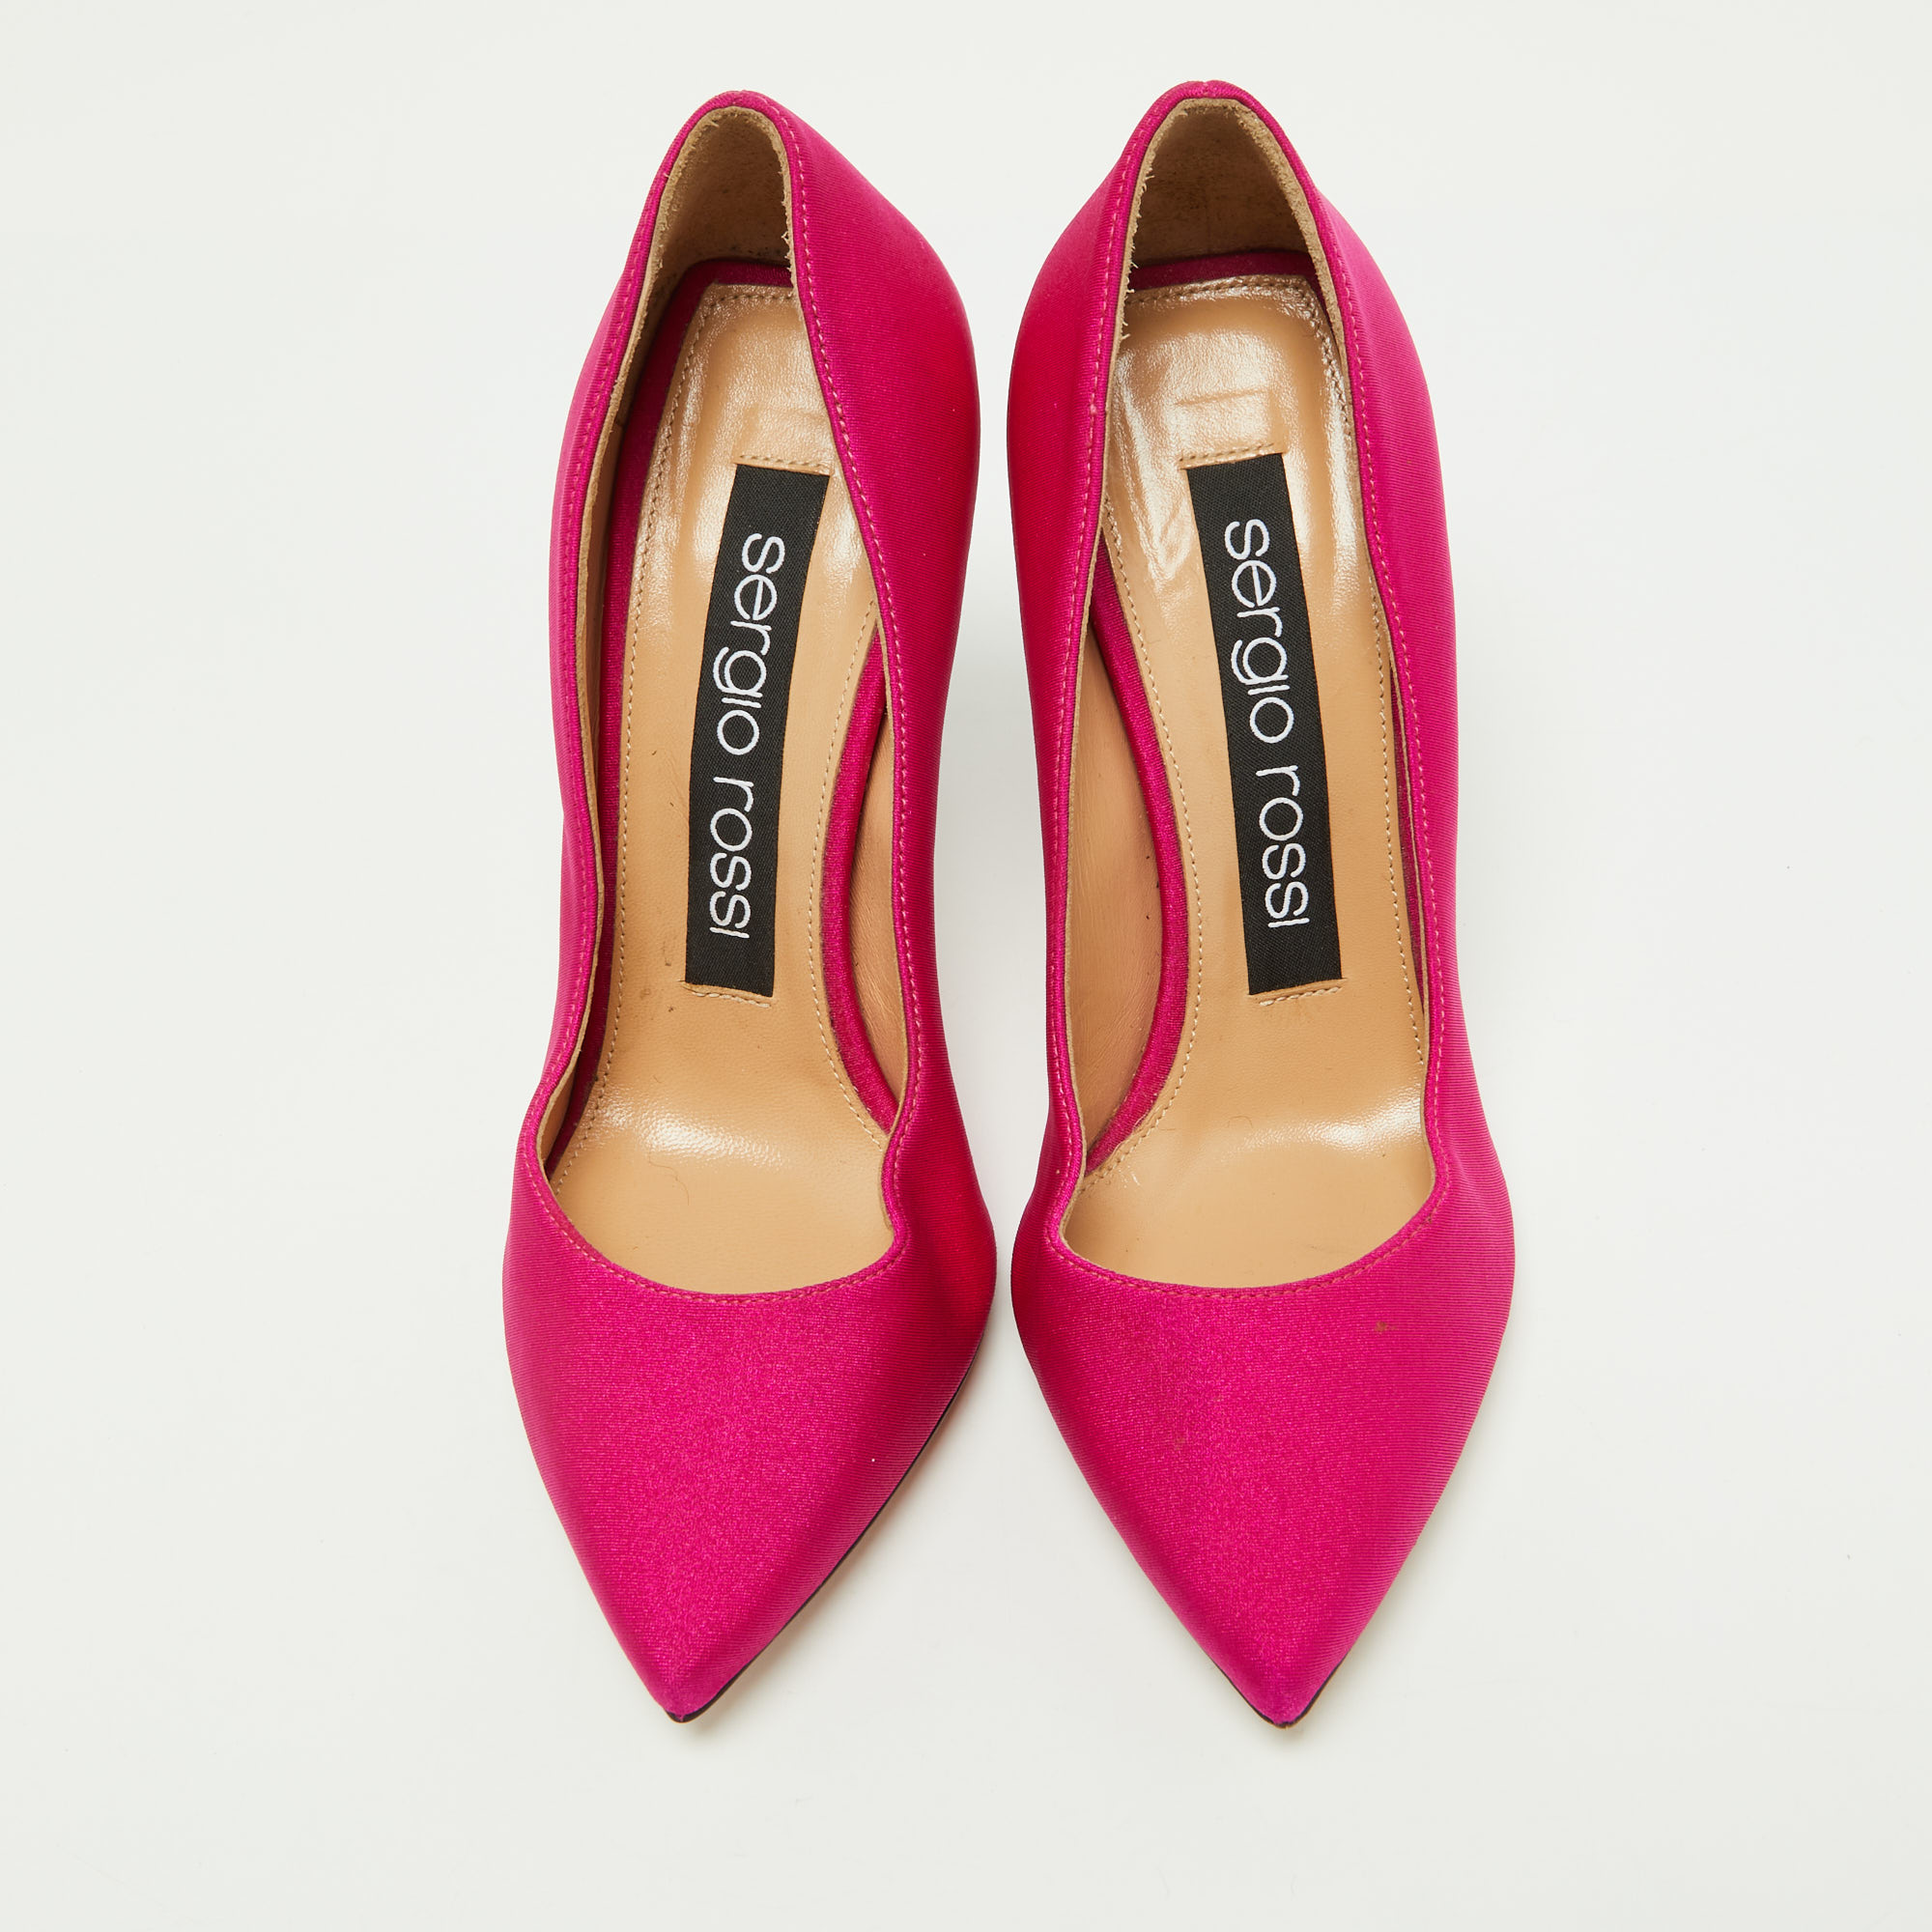 Sergio Rossi Pink Satin Pointed Toe Pumps Size 35.5